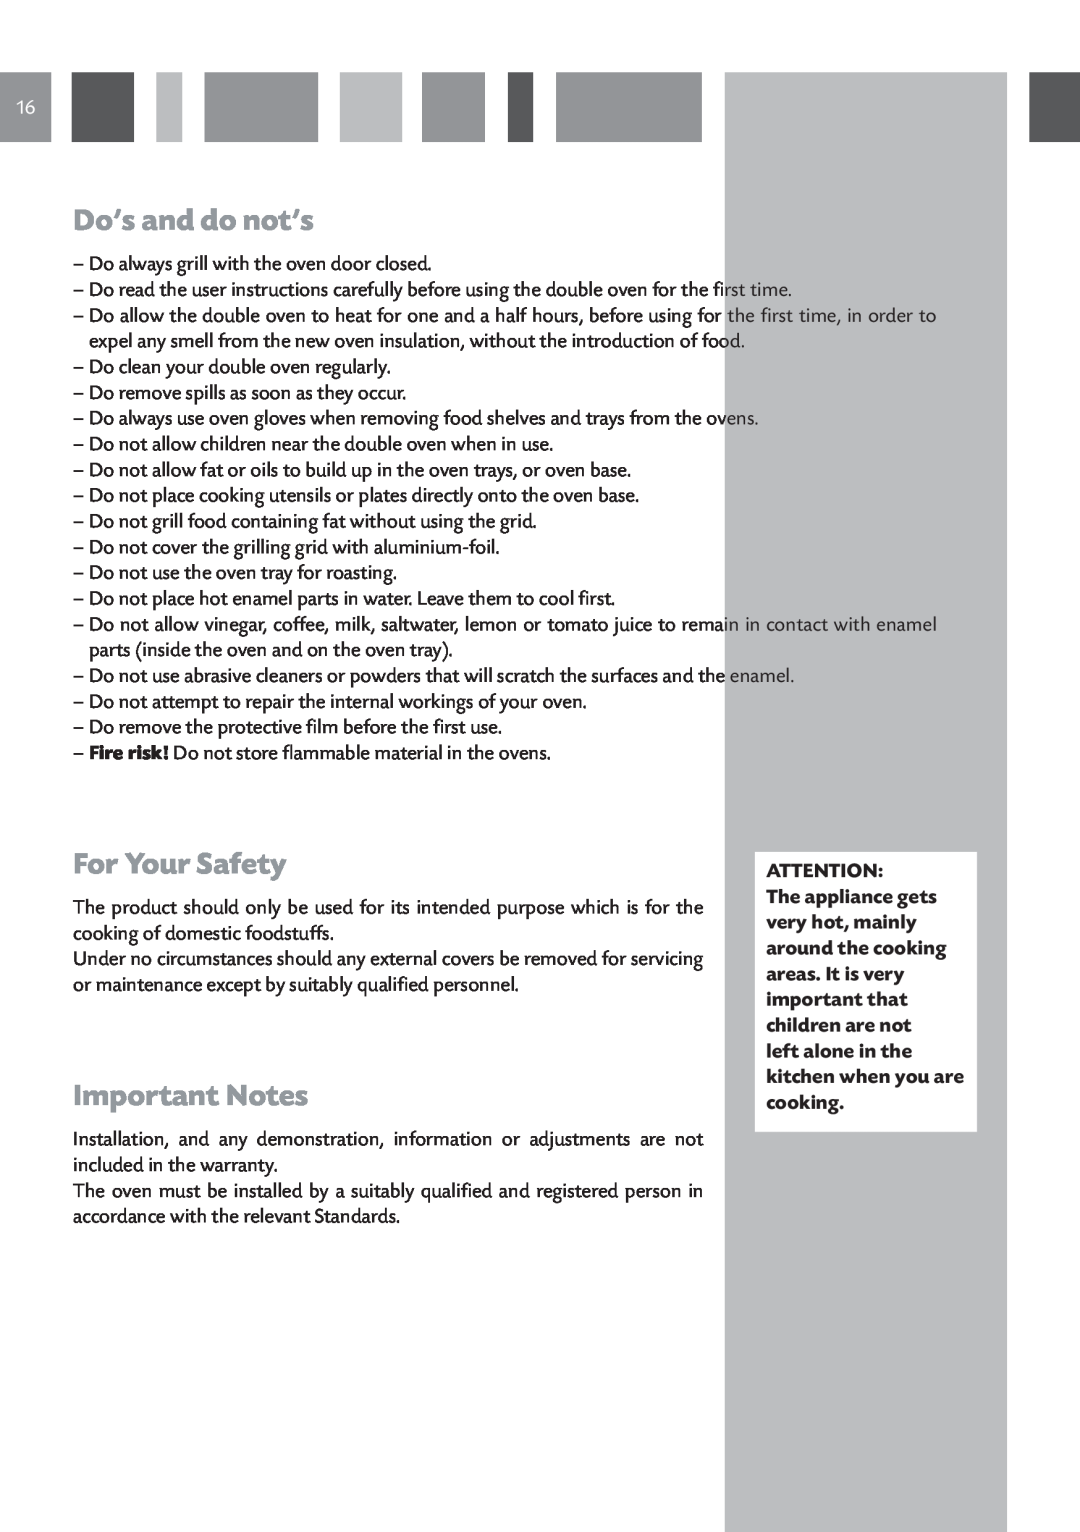 CDA DC930 manual Do’s and do not’s, For Your Safety, Important Notes 